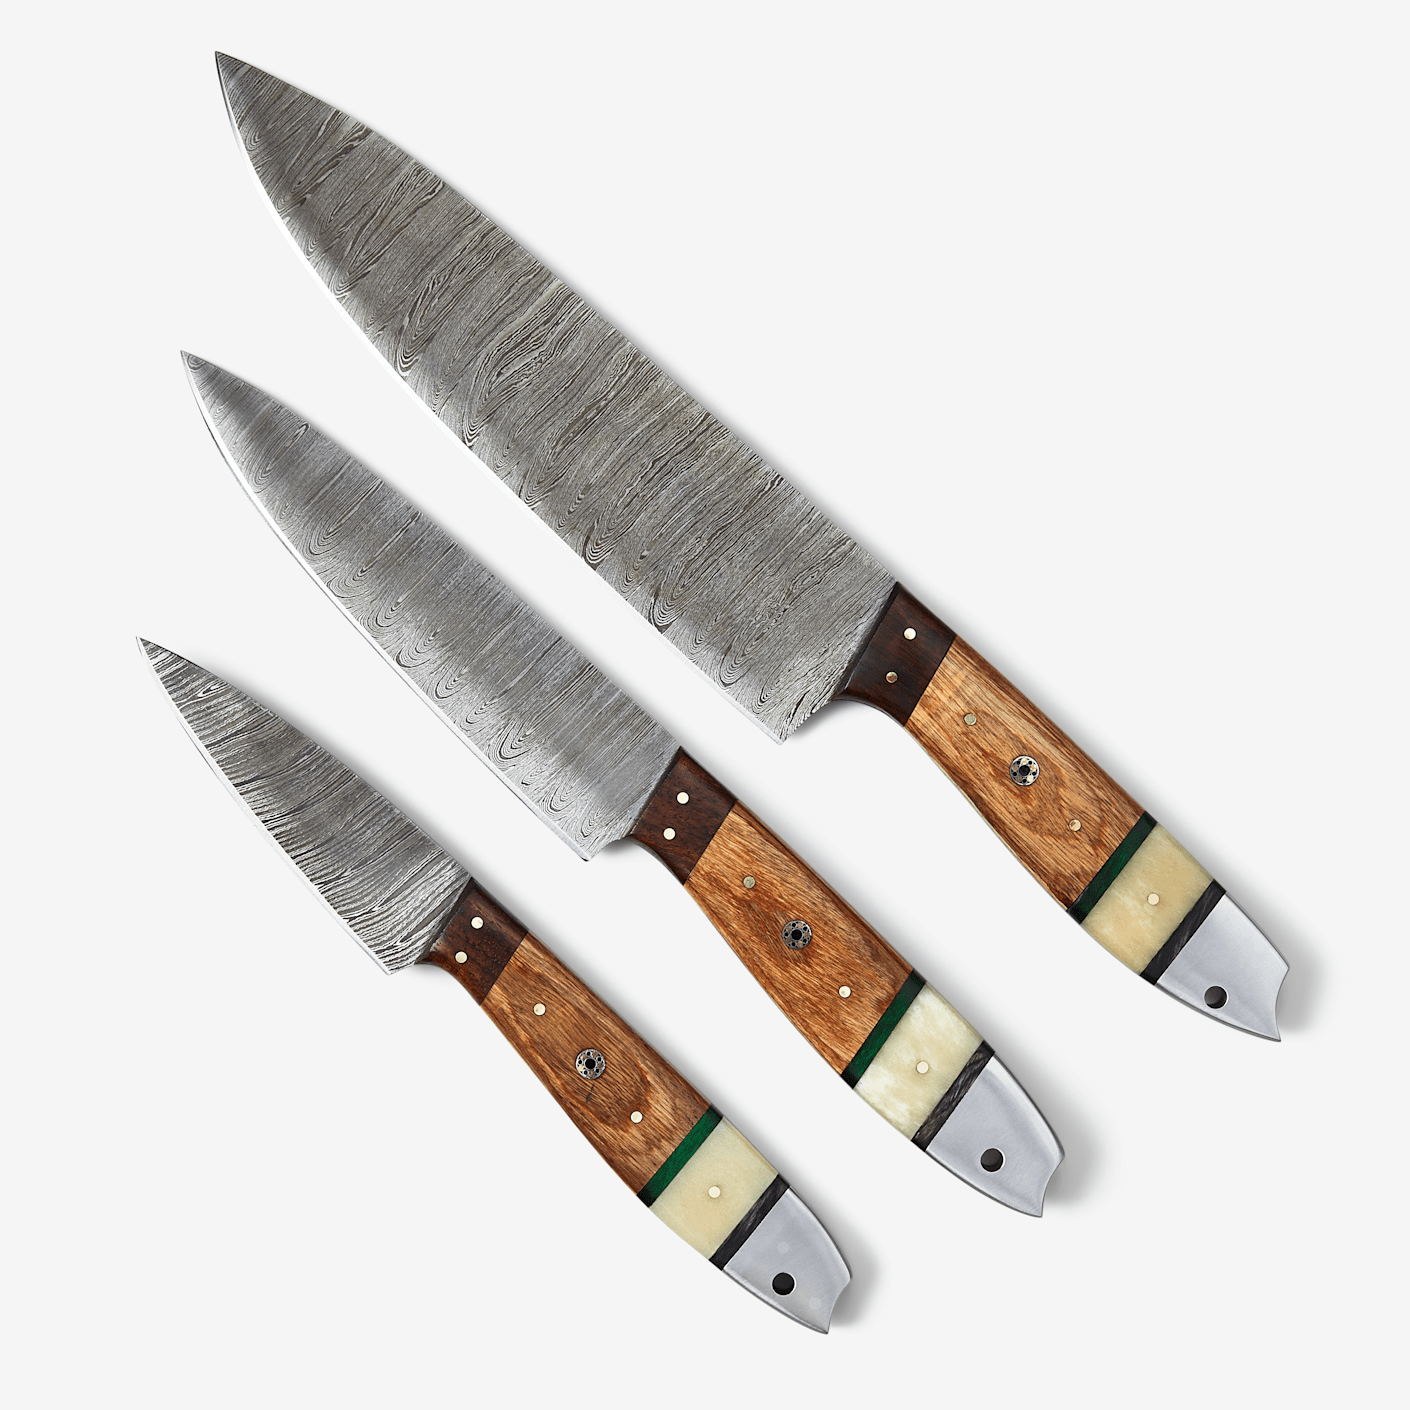 https://dam.bespokepost.com/image/upload/c_limit,dpr_auto,f_auto,q_auto,w_1410/v1/Storefront/2023/01-january/in-house/black-forge-knives-3-piece-damascus-chef-knife-set_1